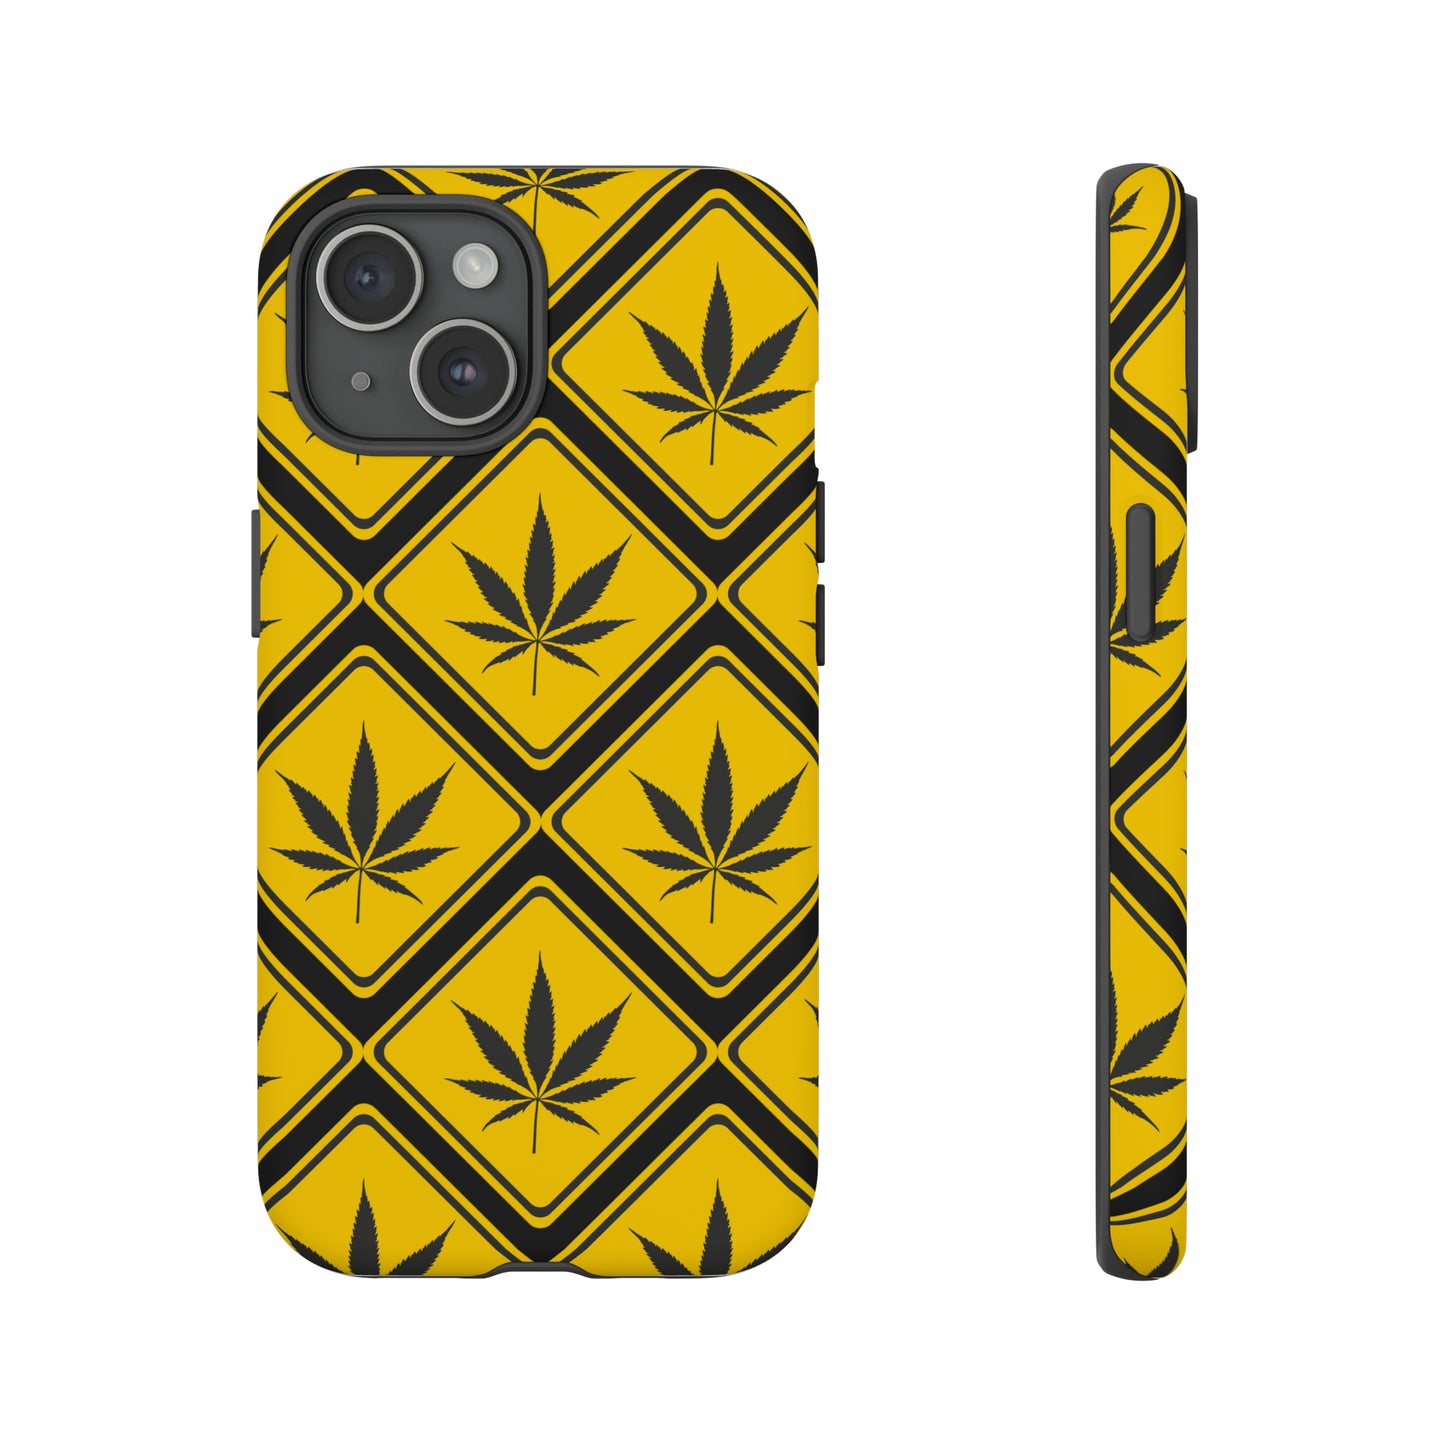 WEED AHEAD Tough Cases